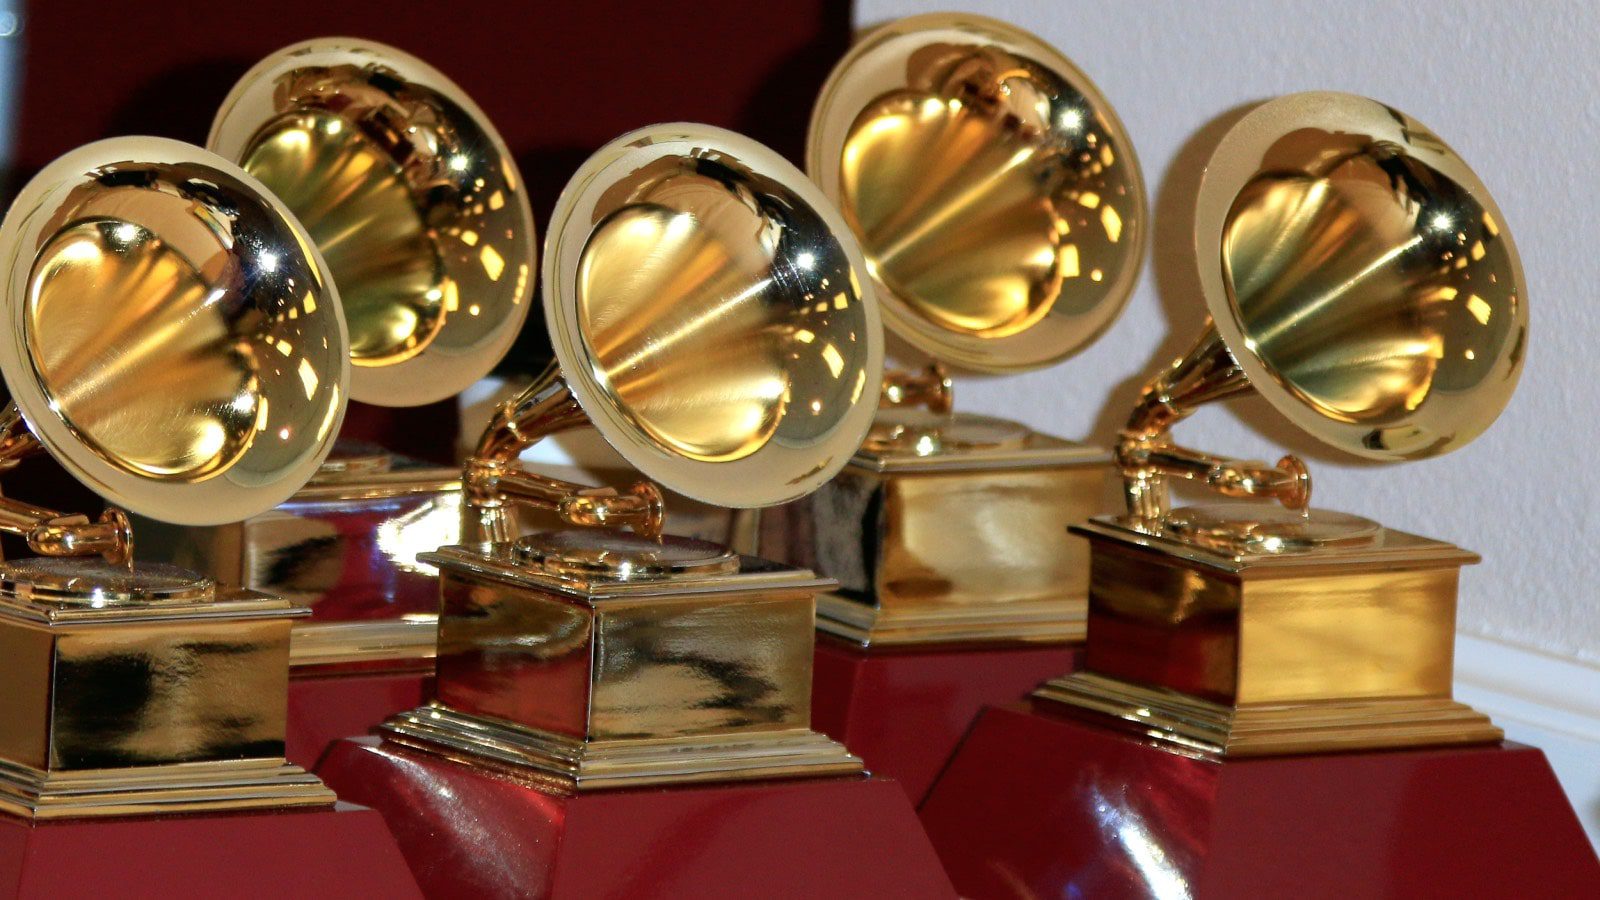 A table holding five Grammy trophies.